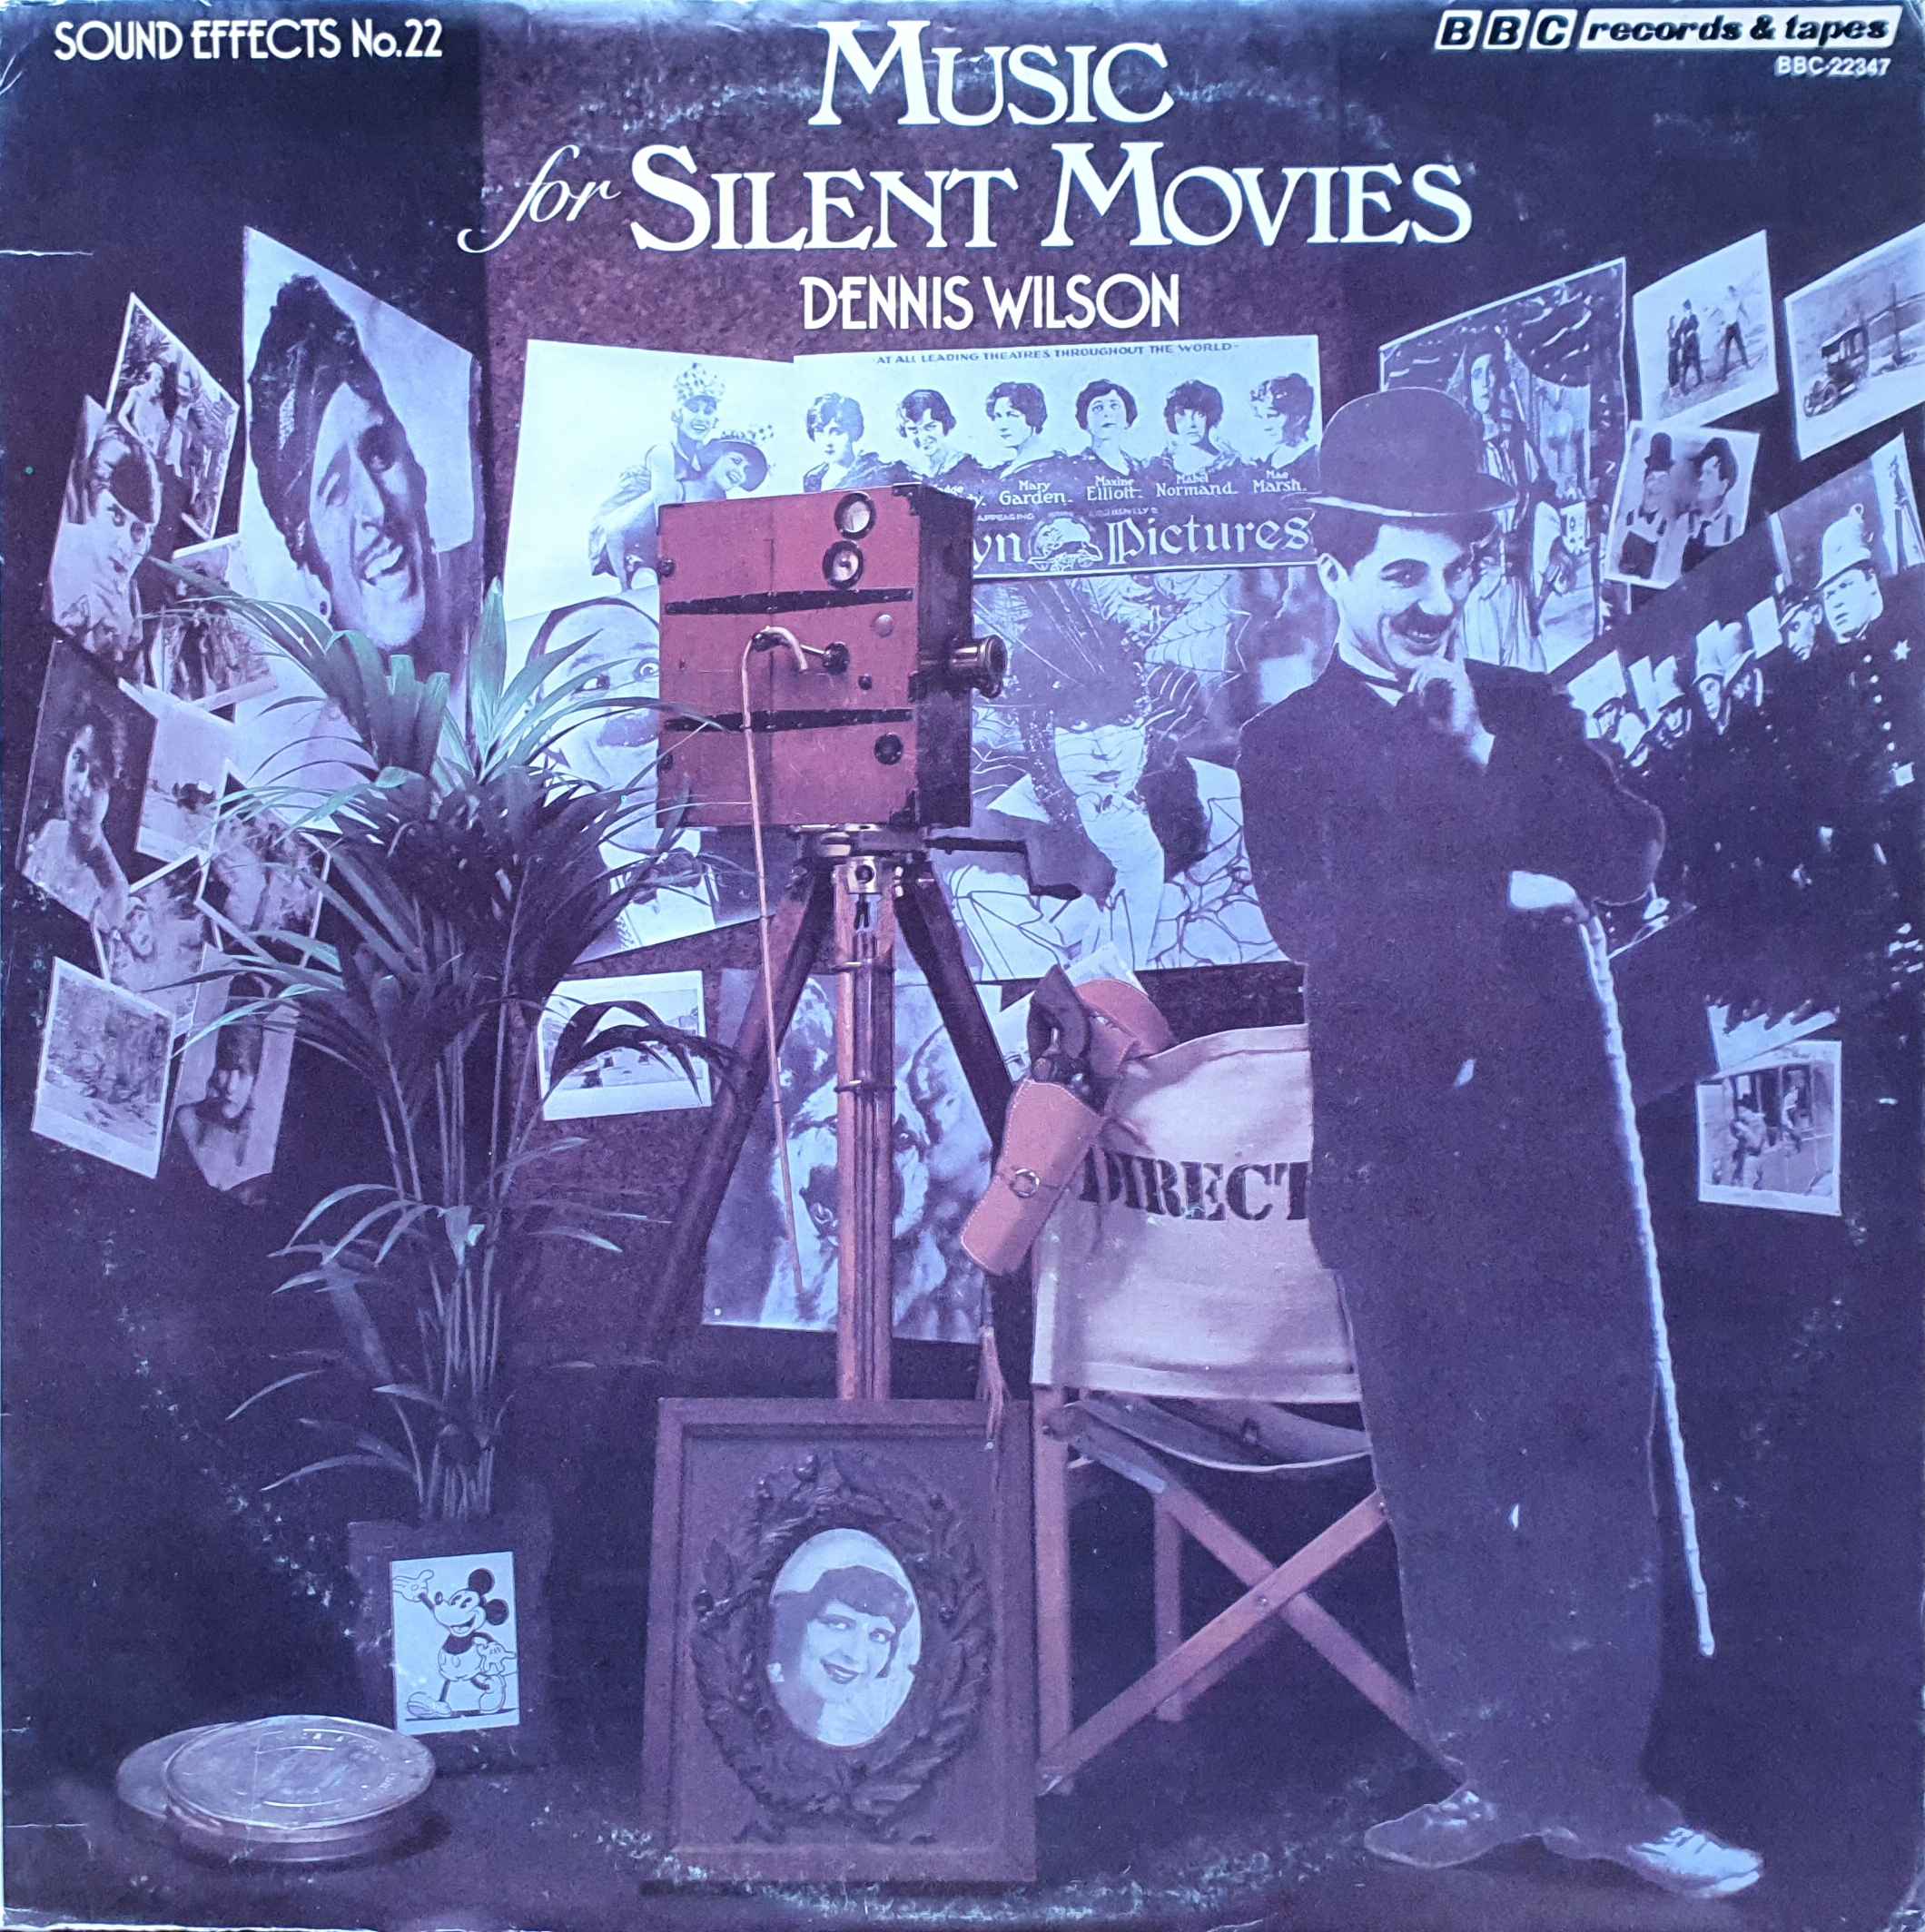 Picture of BBC - 22347 Sound effects no.22 - Music for silent movies (US import) by artist Various from the BBC albums - Records and Tapes library